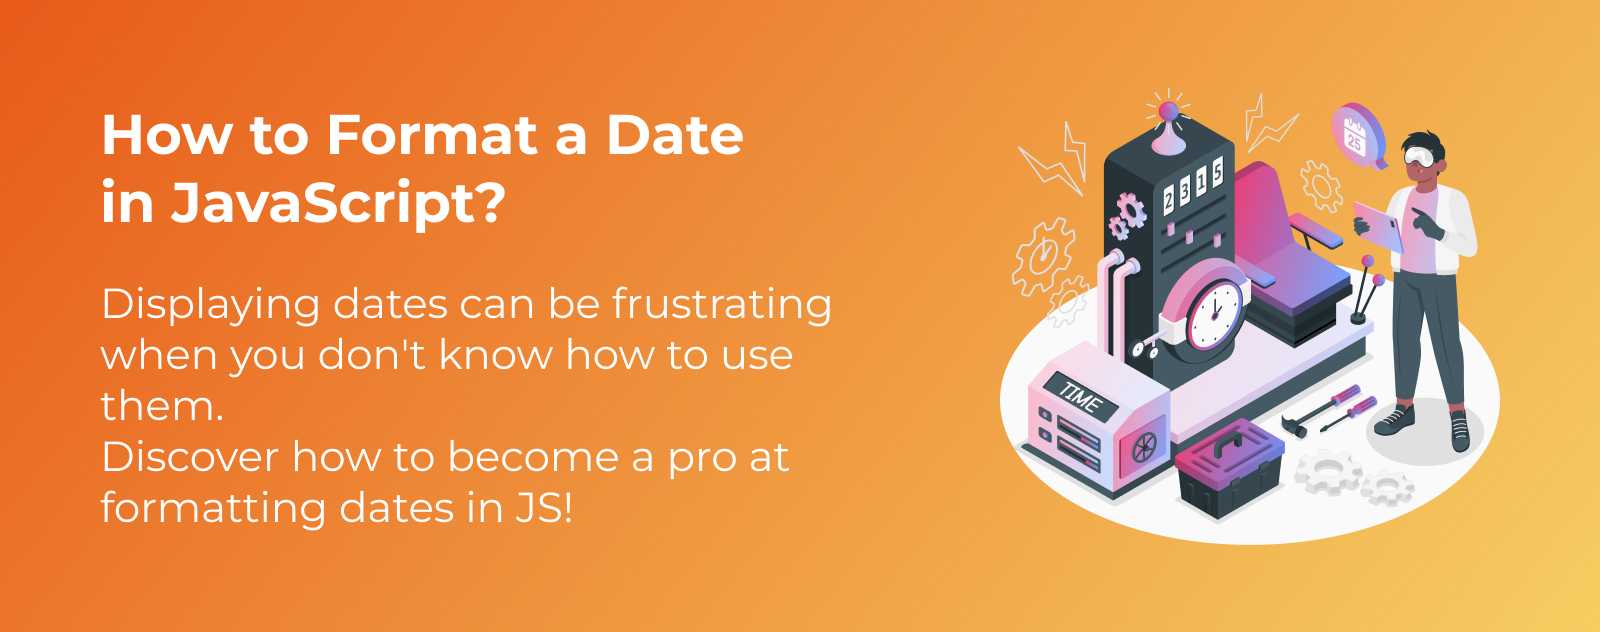 How to Format a Date in JavaScript?